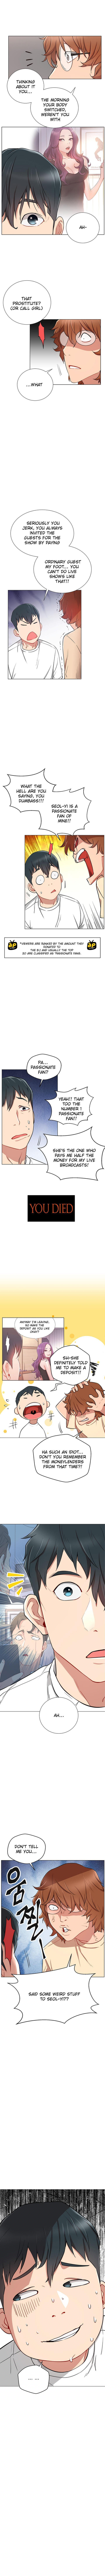 Bus LIVE WITH : DO YOU WANT TO DO IT Ch. 7 Cute - Page 7